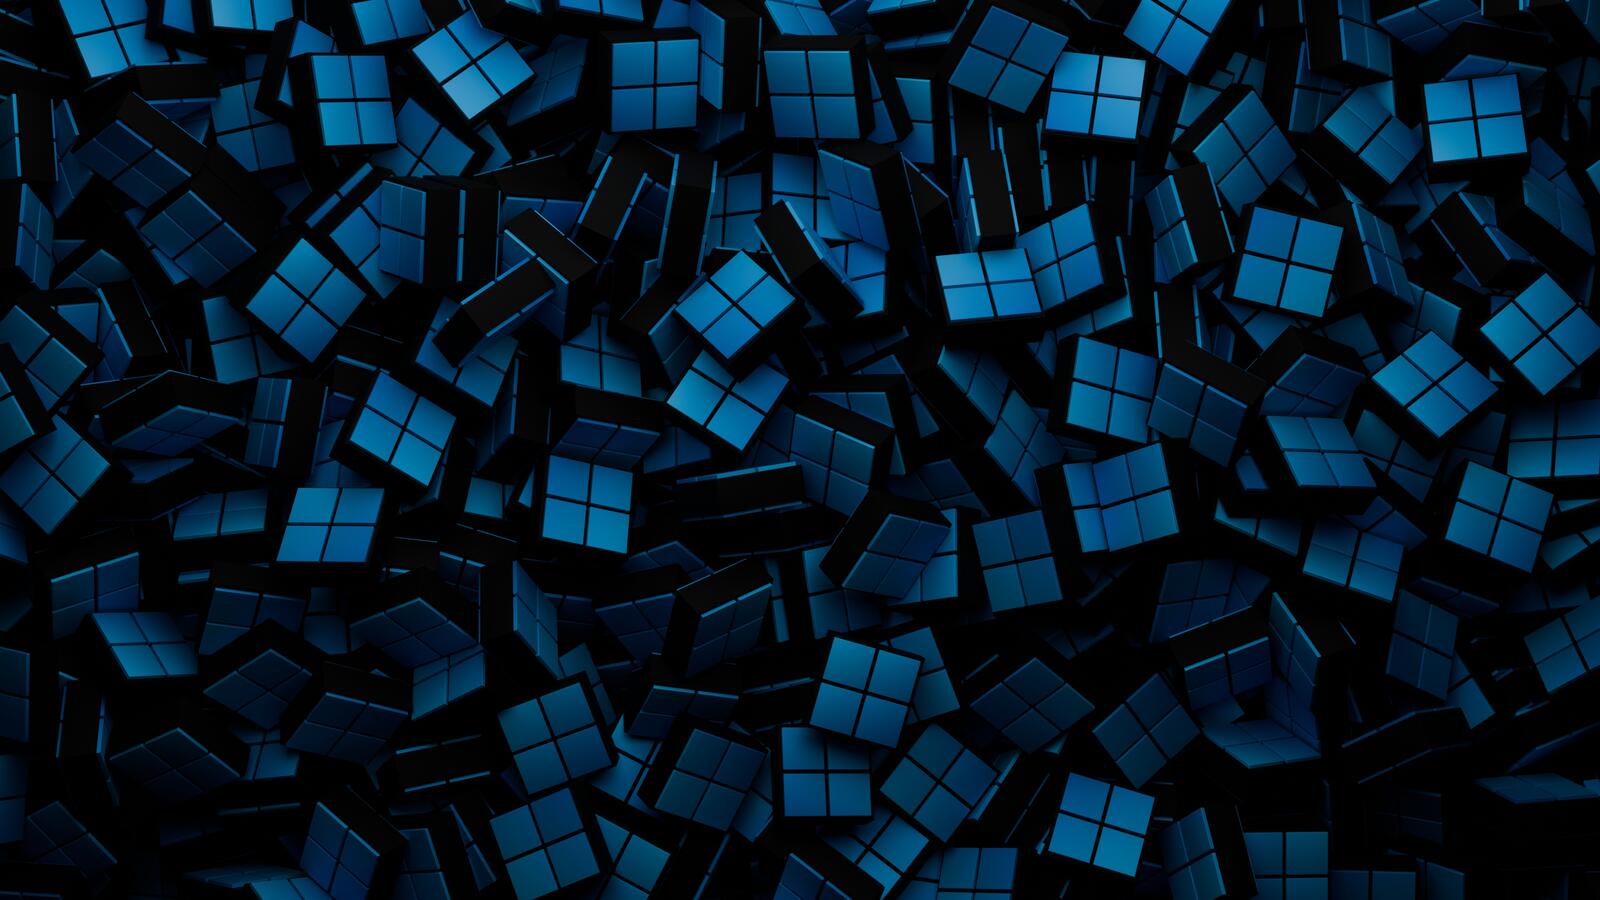 Free photo Lots of little blue cubes